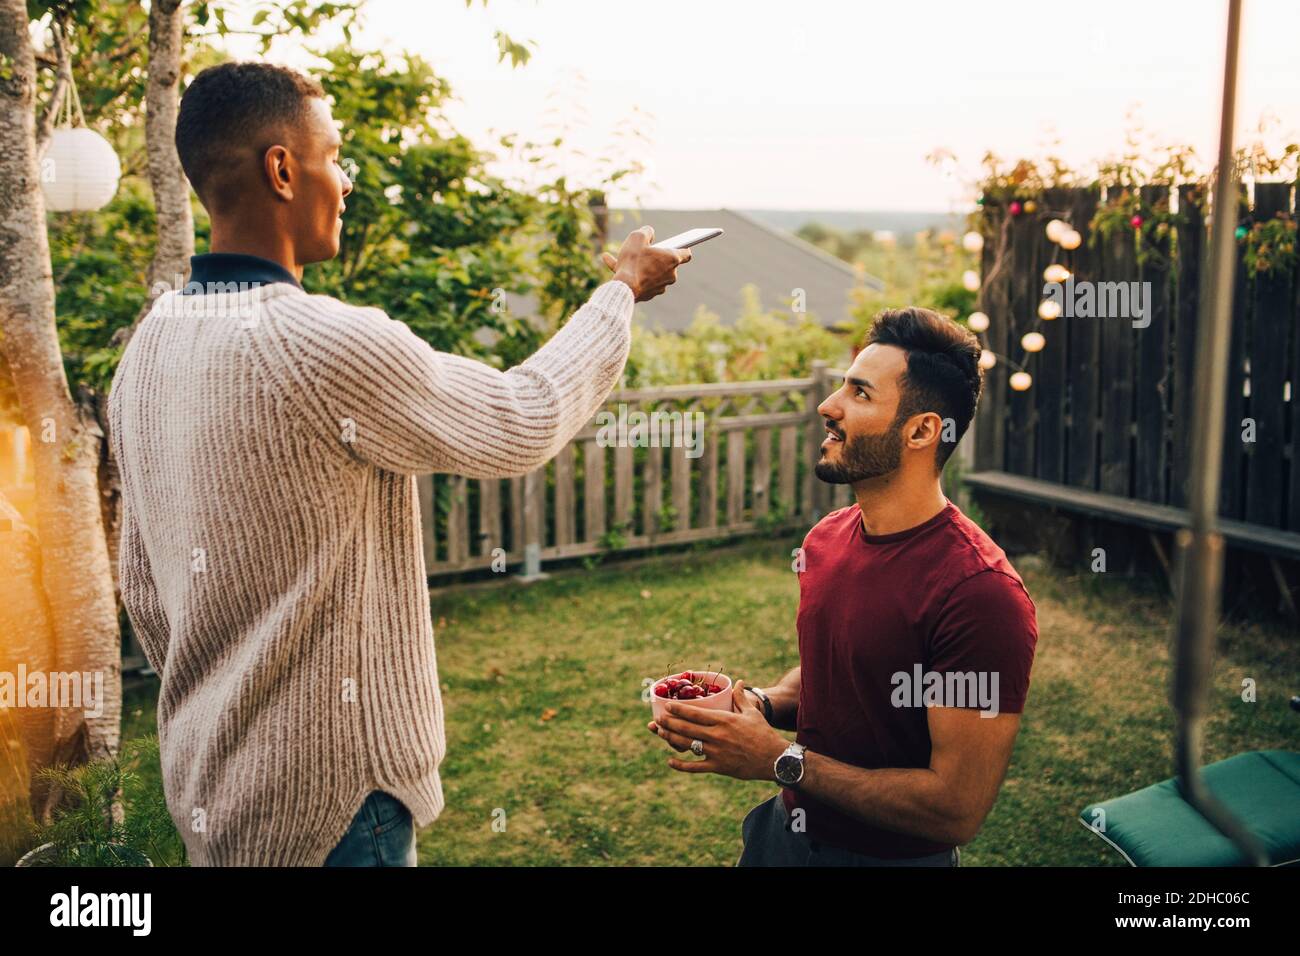 Young man photographing cherries being held by male friend in yard during sunset Stock Photo